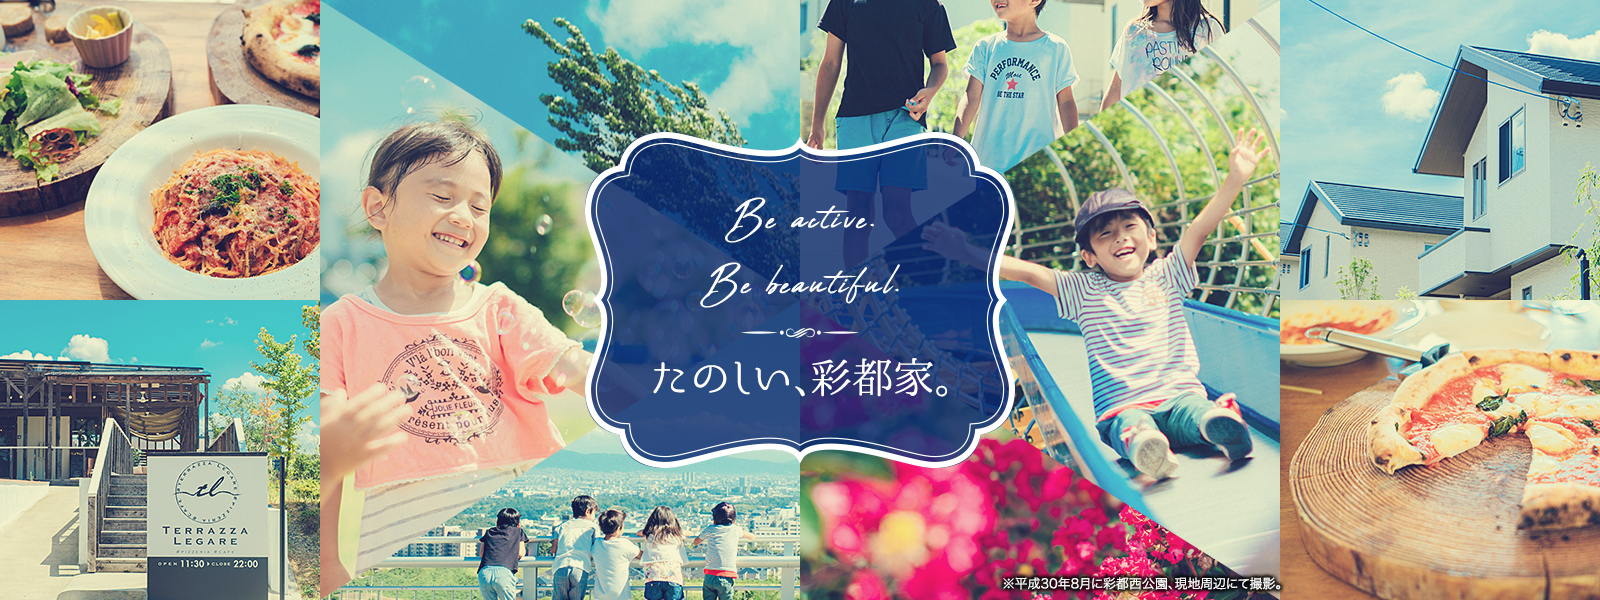 Be active.Be beautiful.たのしい、彩都家。